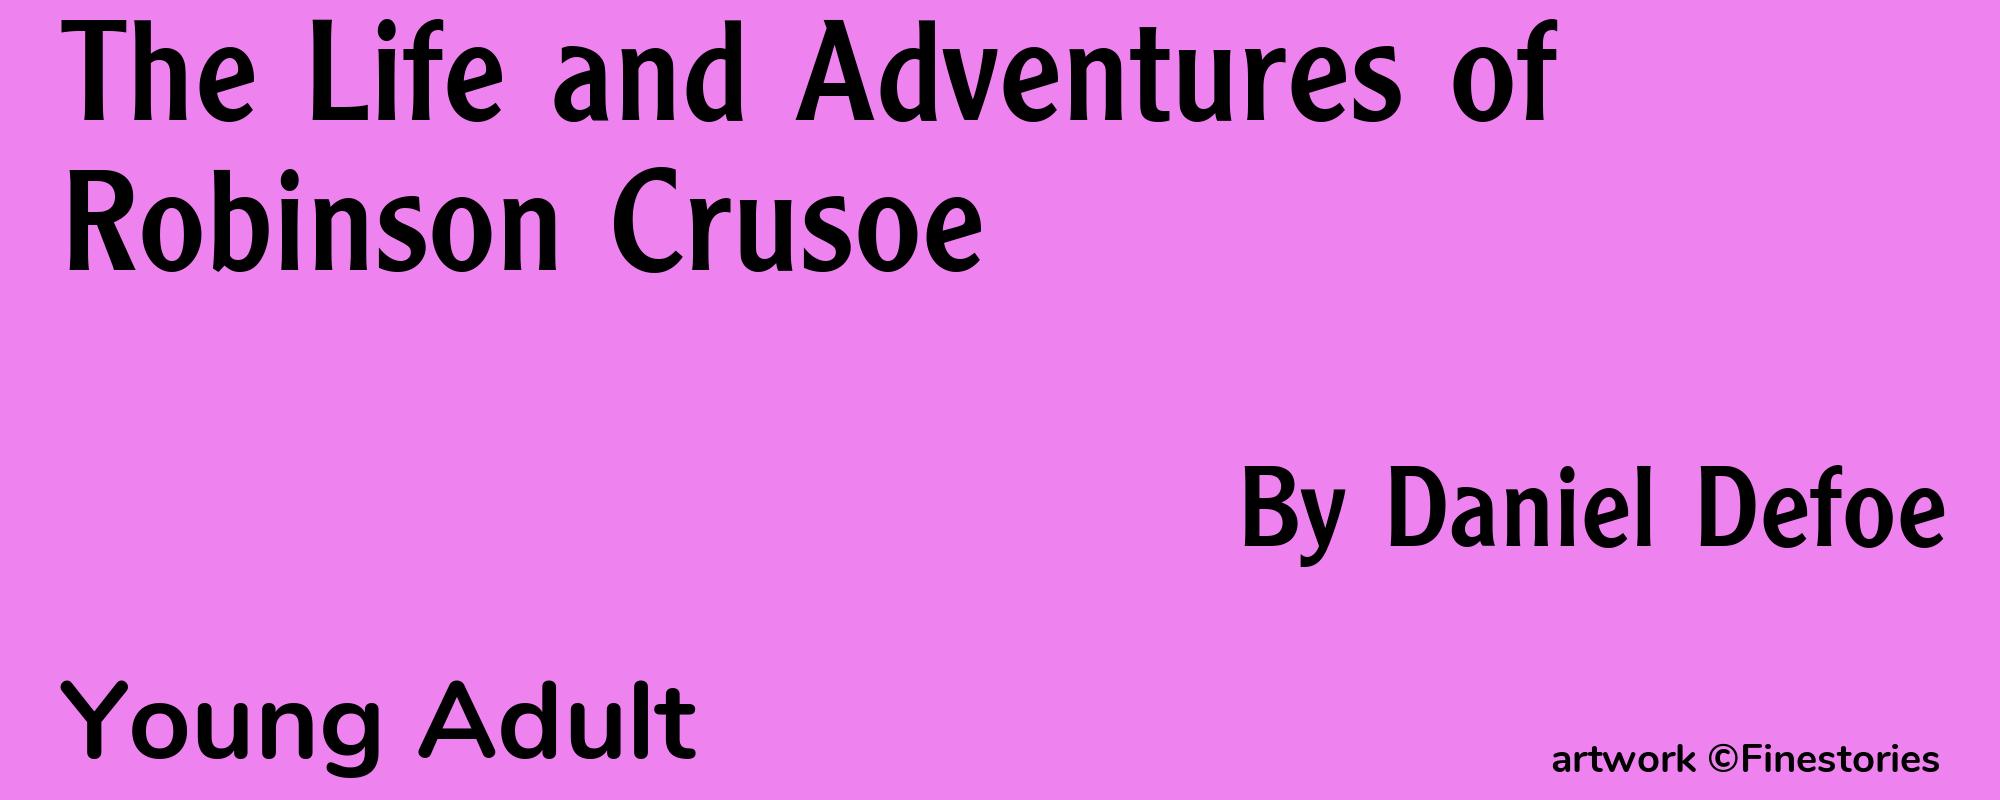 The Life and Adventures of Robinson Crusoe - Cover